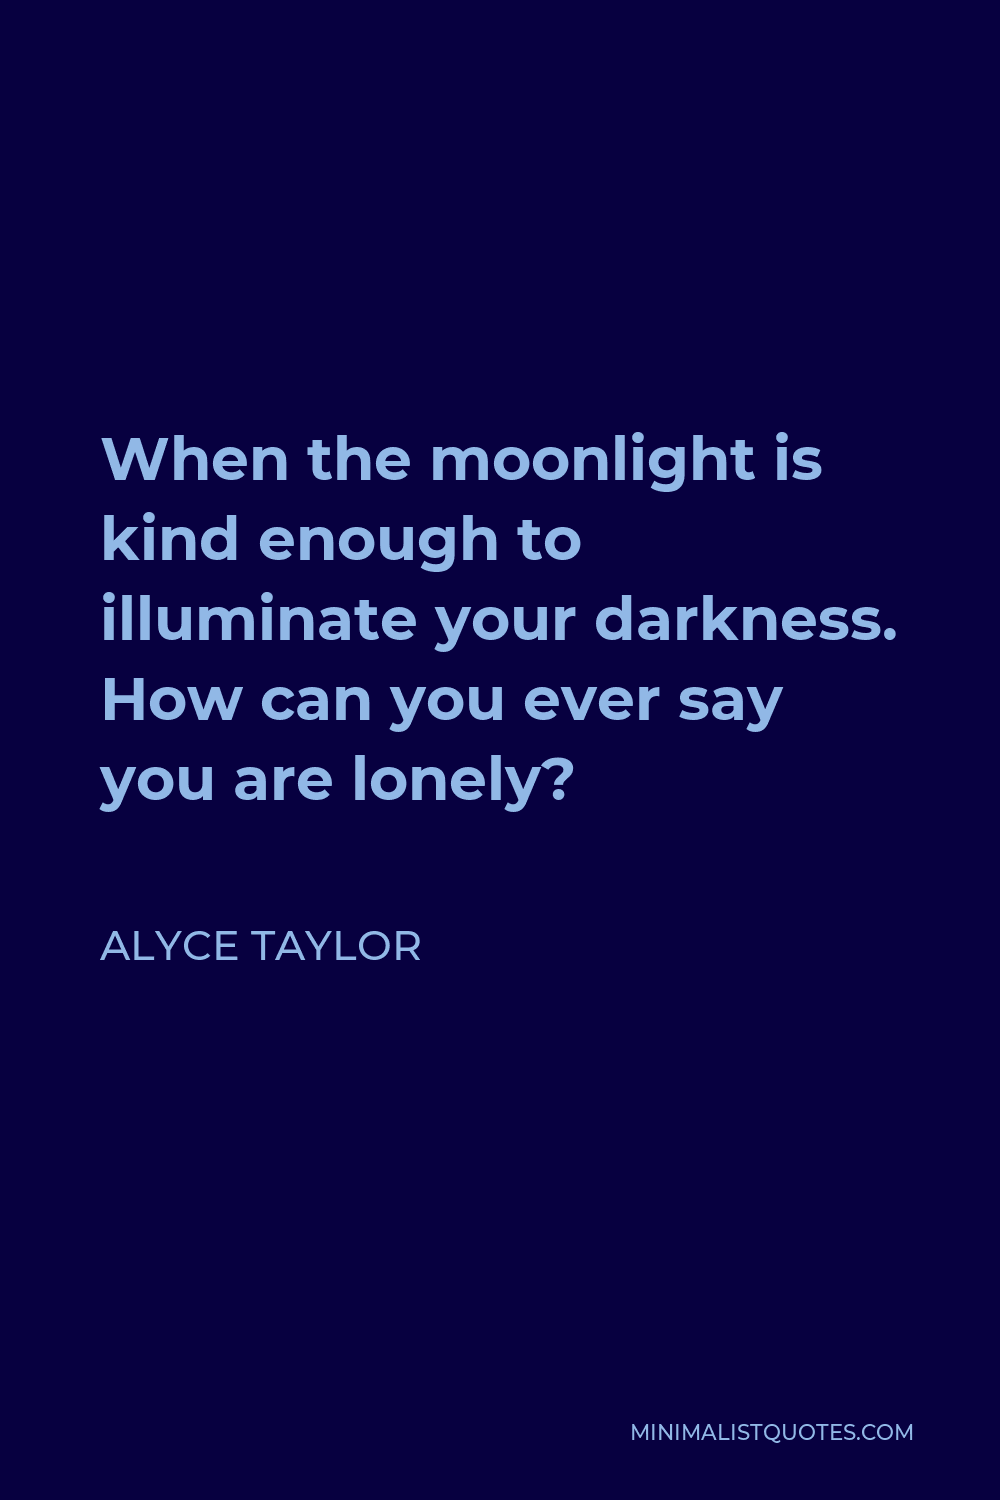 Alyce Taylor Quote - When the moonlight is kind enough to illuminate your darkness. How can you ever say you are lonely?